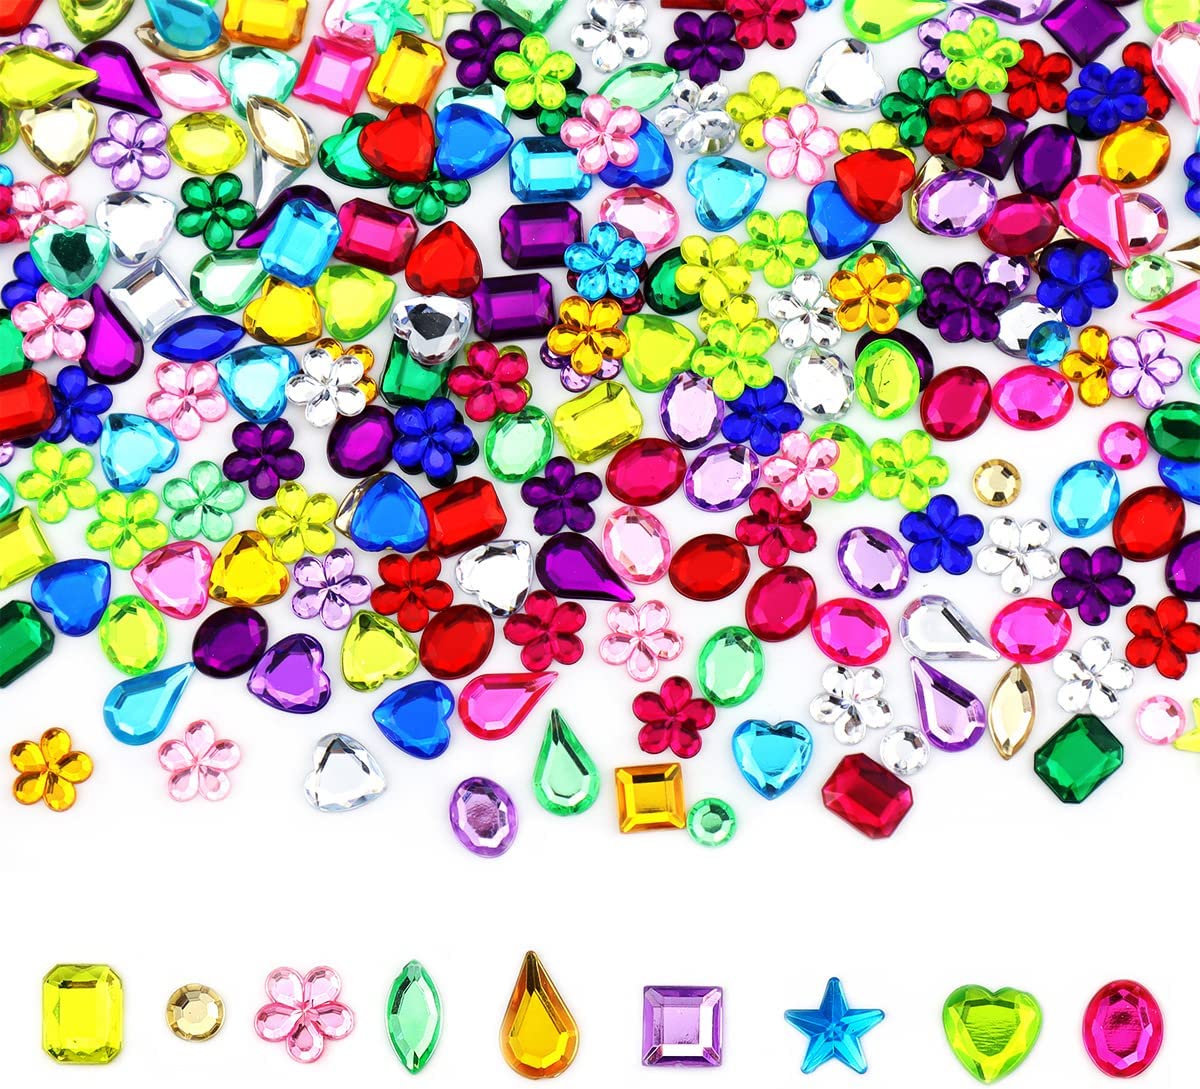 20mm Crystal Clear H102 Flat Back Round Acrylic Gems High Quality Pro Grade 20 Pieces